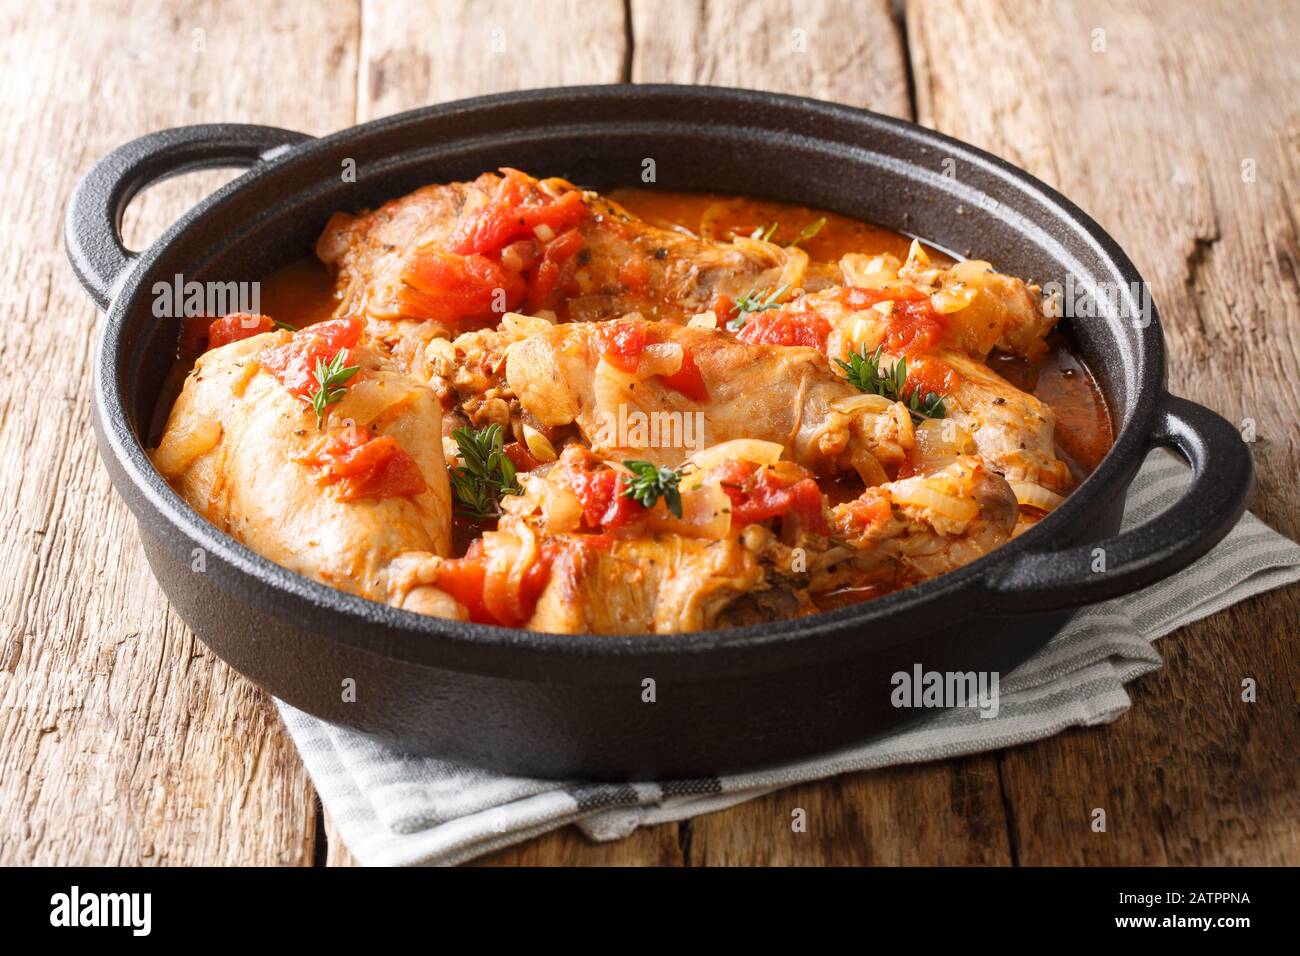 Tasty spicy rabbit stew in tomato sauce with white wine and herbs close-up in a pan on the table. horizontal Stock Photo